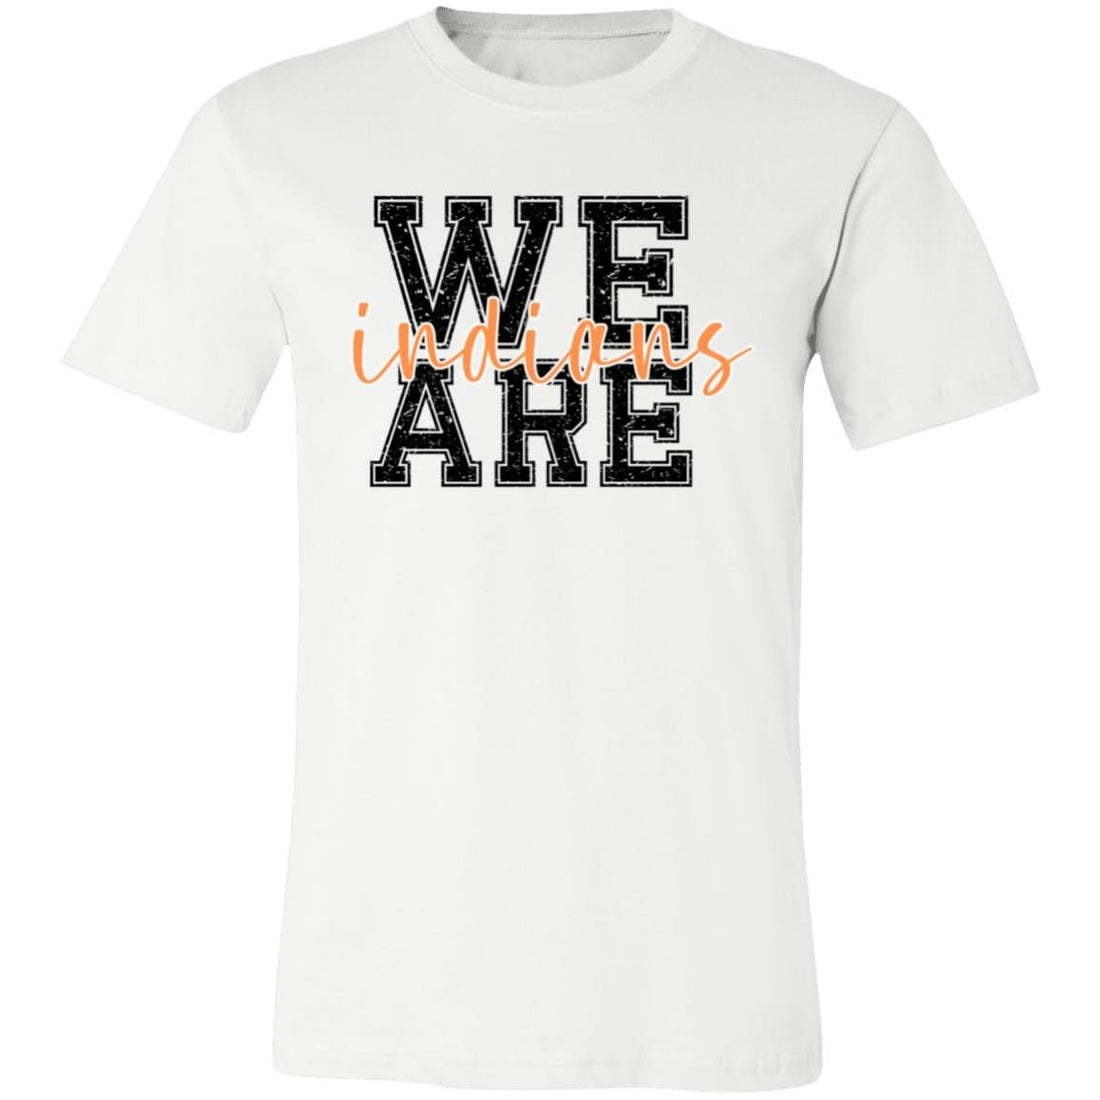 We Are Indians Unisex Jersey Short-Sleeve T-Shirt - T-Shirts - Positively Sassy - We Are Indians Unisex Jersey Short-Sleeve T-Shirt